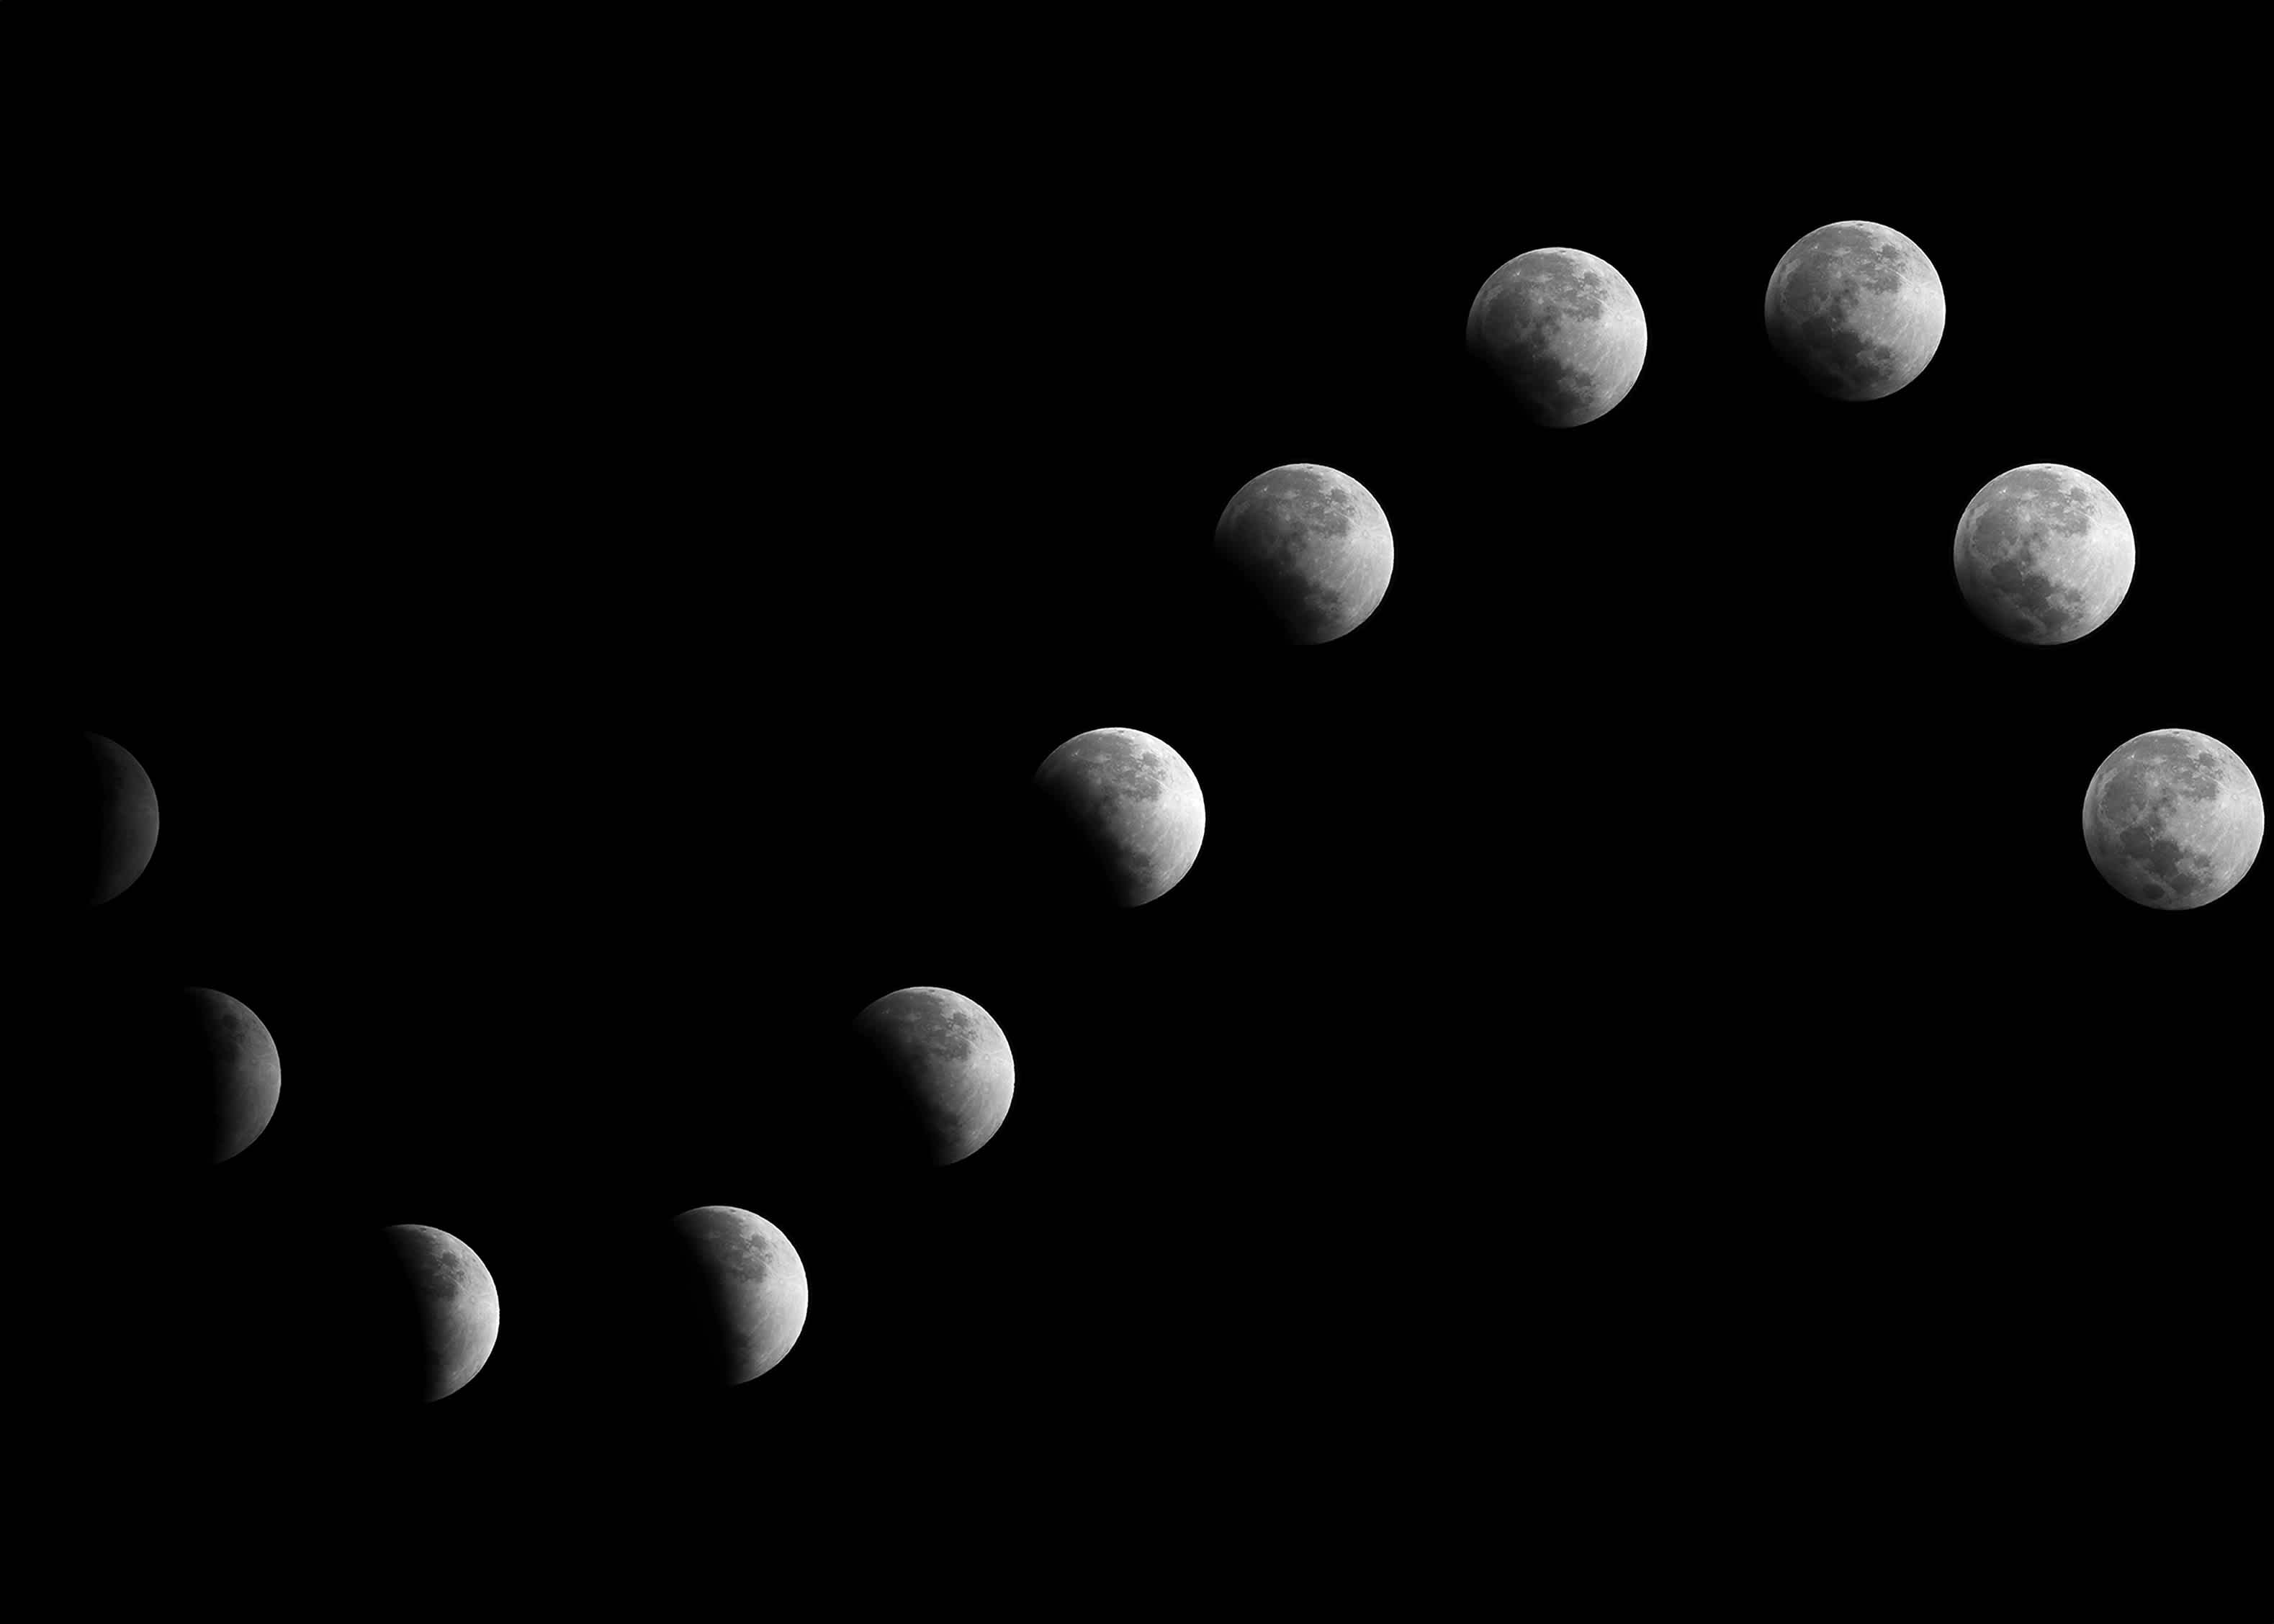 Photos of the moon in various phases superimposed into the same image